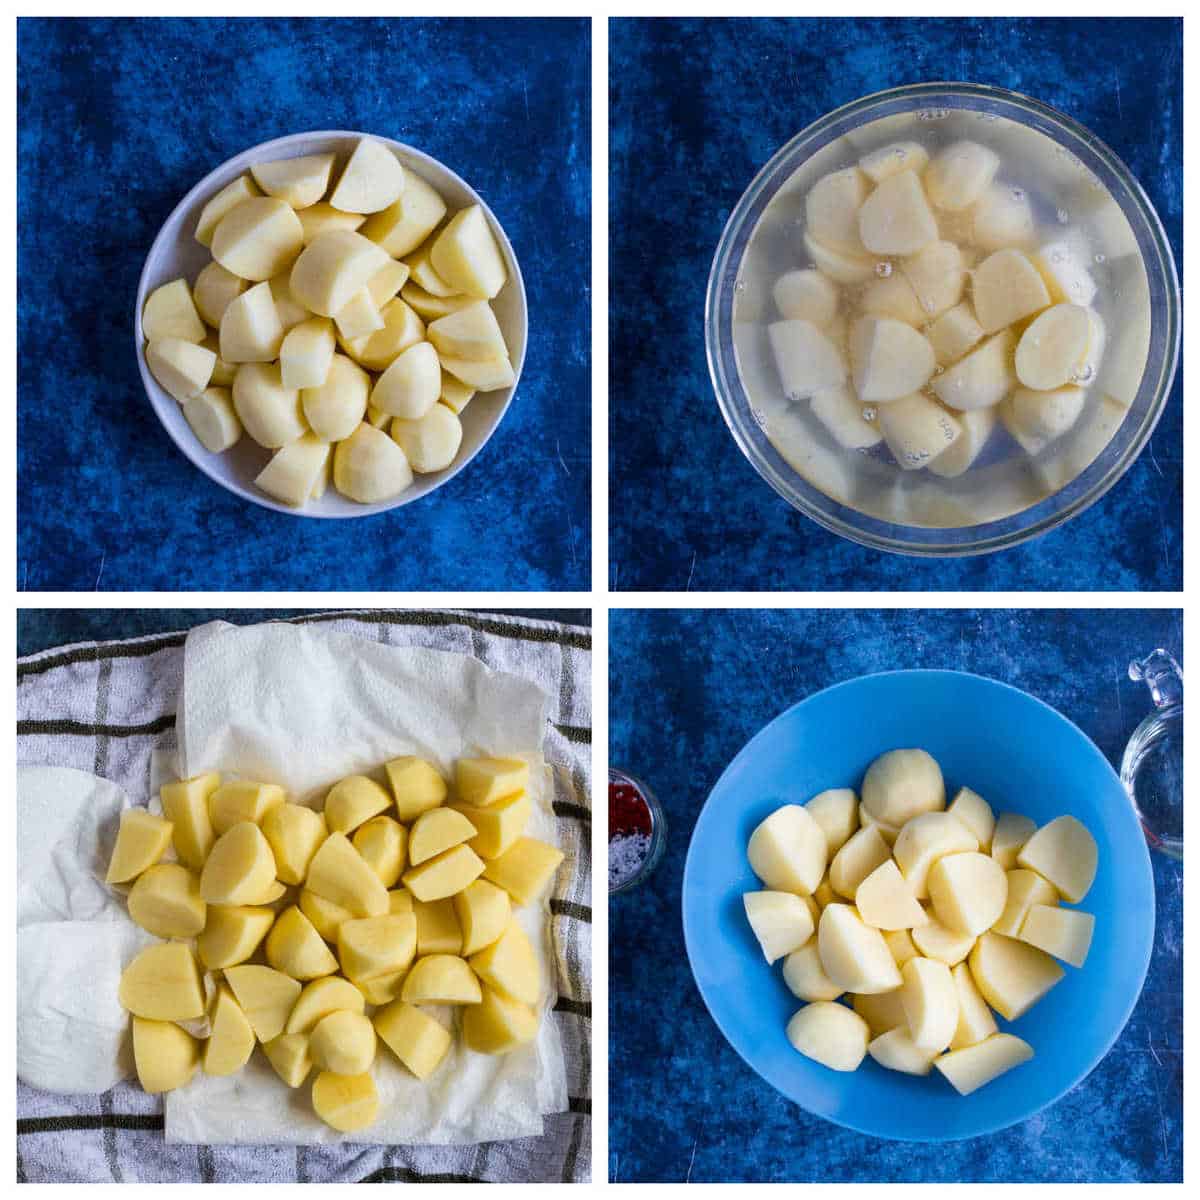 Step by step photo instructions for making air fryer potatoes.